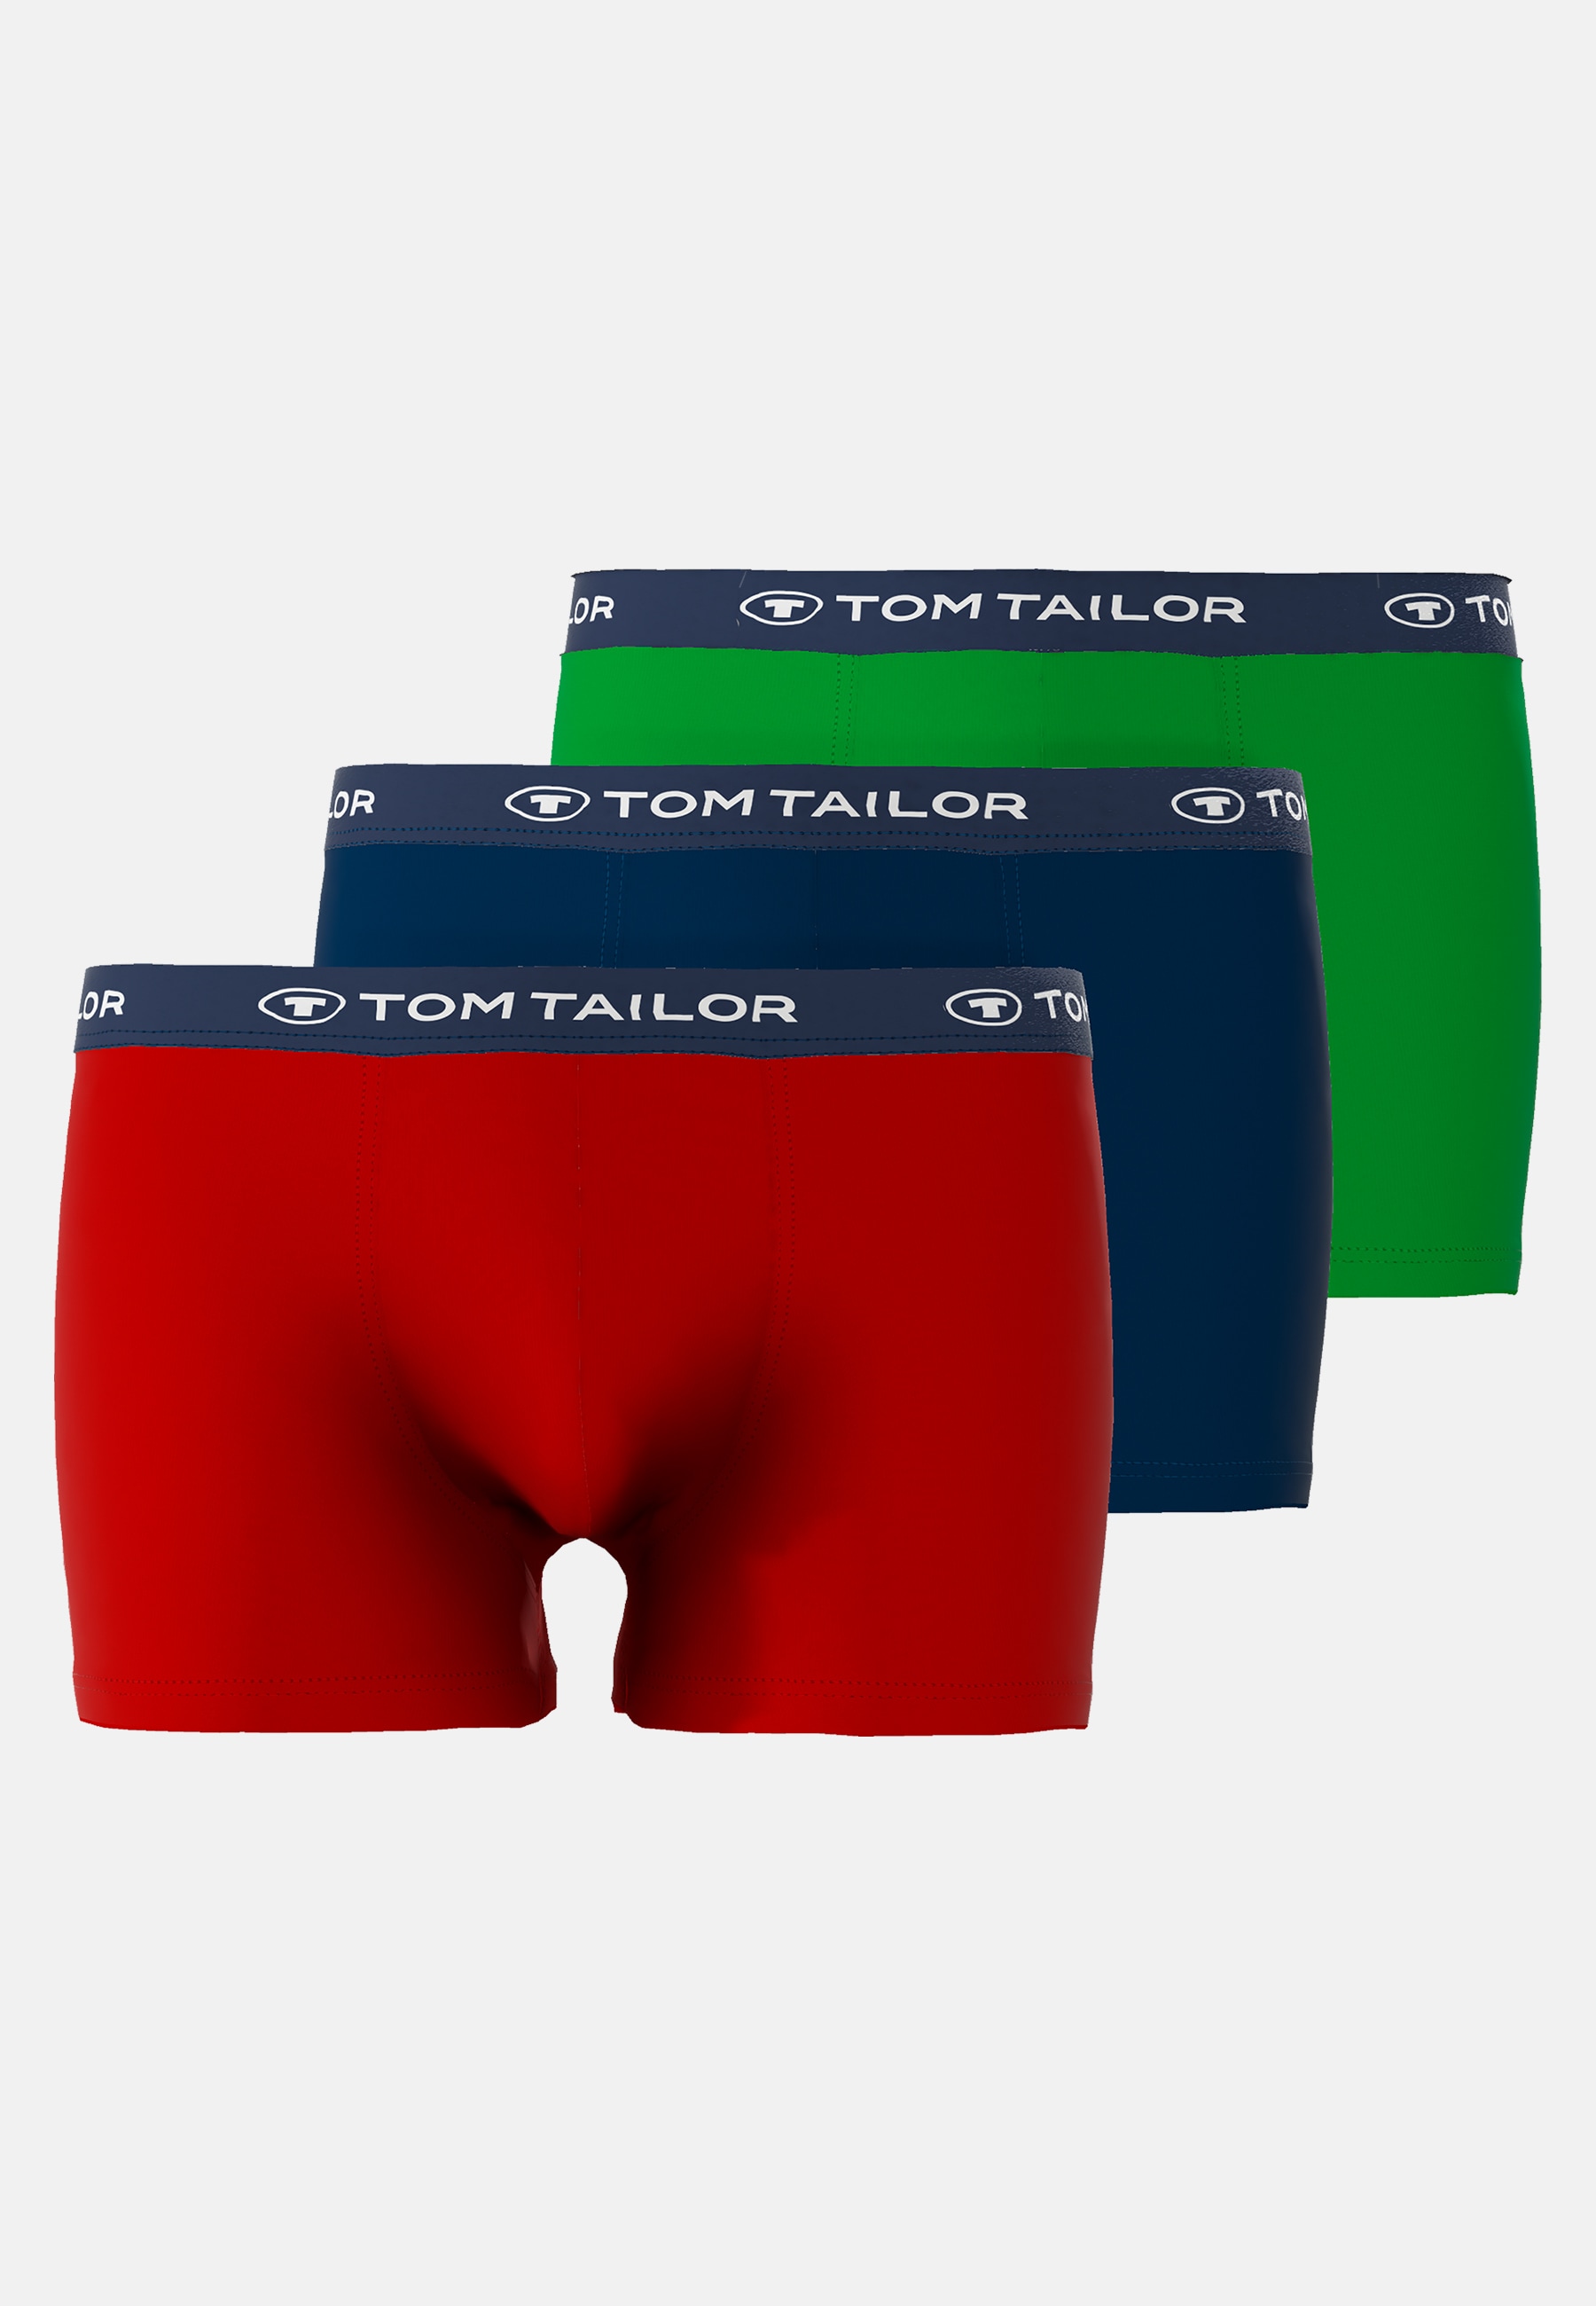 TOM TAILOR Boxershorts "Buffer", (Packung, 3 St.) 2